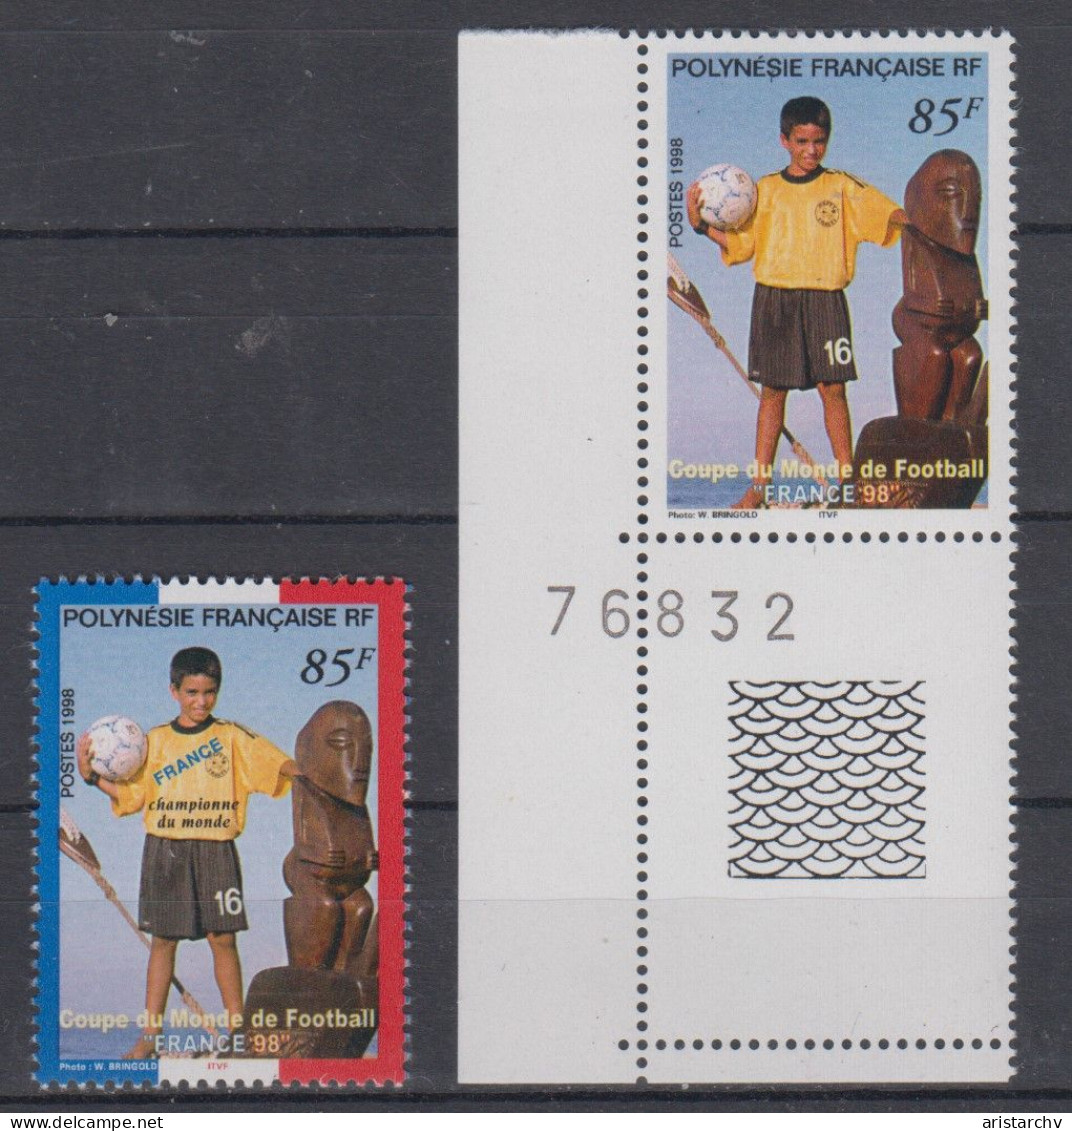 FRENCH POLYNESIA 1998 FOOTBALL WORLD CUP 2 STAMPS 1 WITH OVERPRINT - 1998 – Frankreich